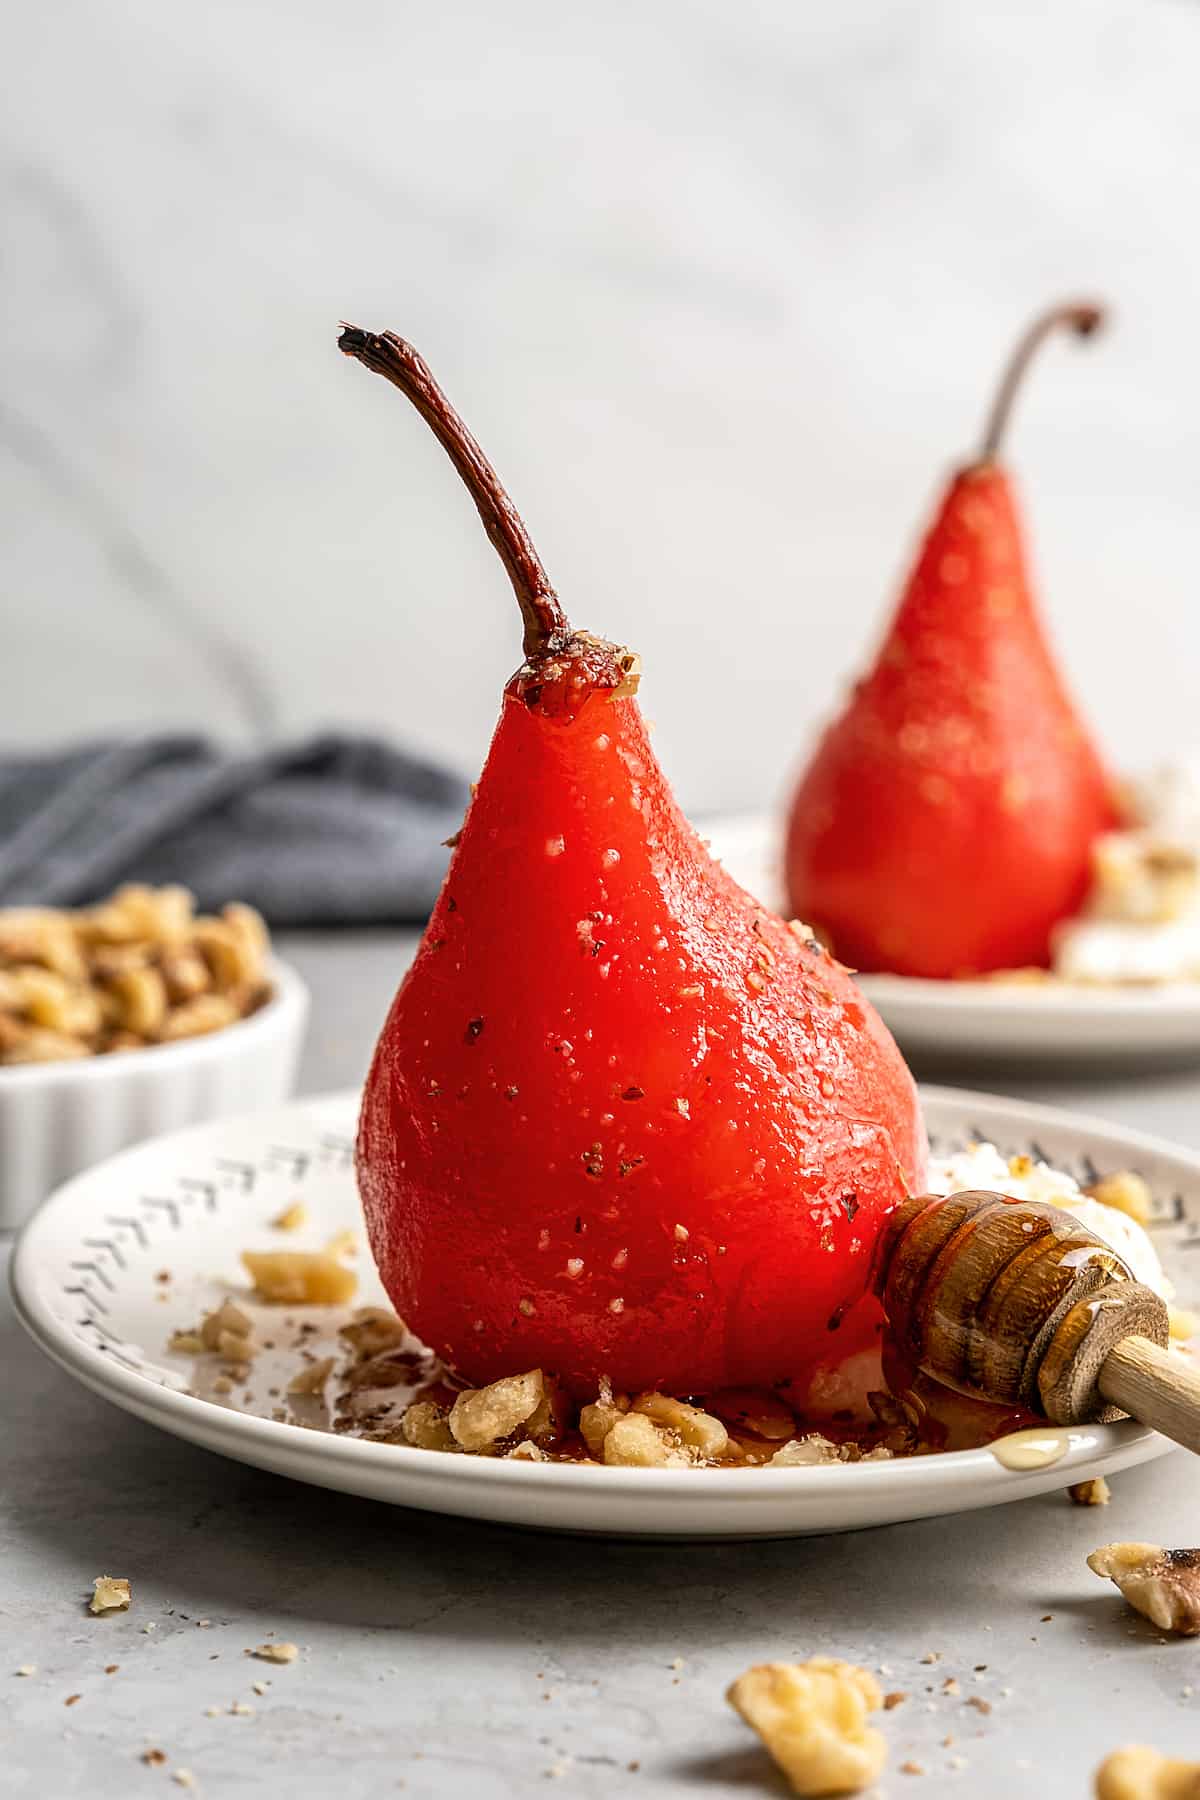 A poached pear on a plate with walnuts and a wooden honey spoon, with a bowl of walnuts and another poached pear in the background